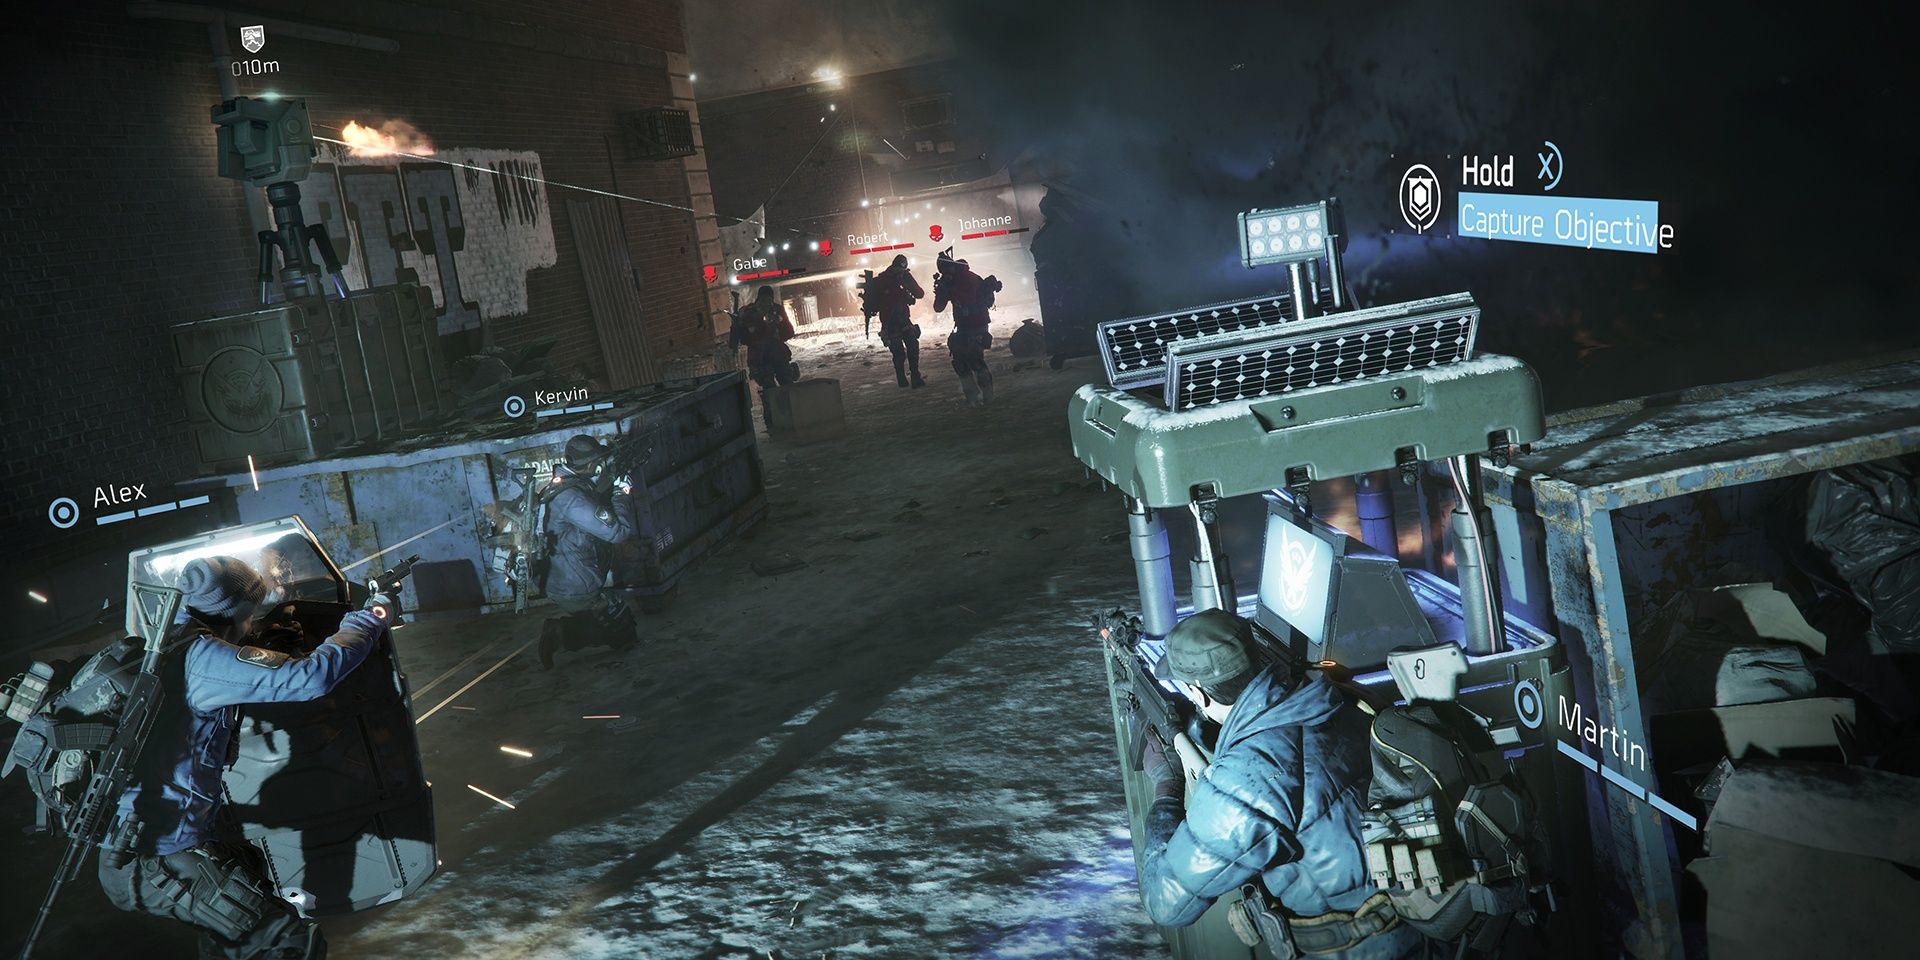 A screenshot showing a firefight between two teams of players in The Division